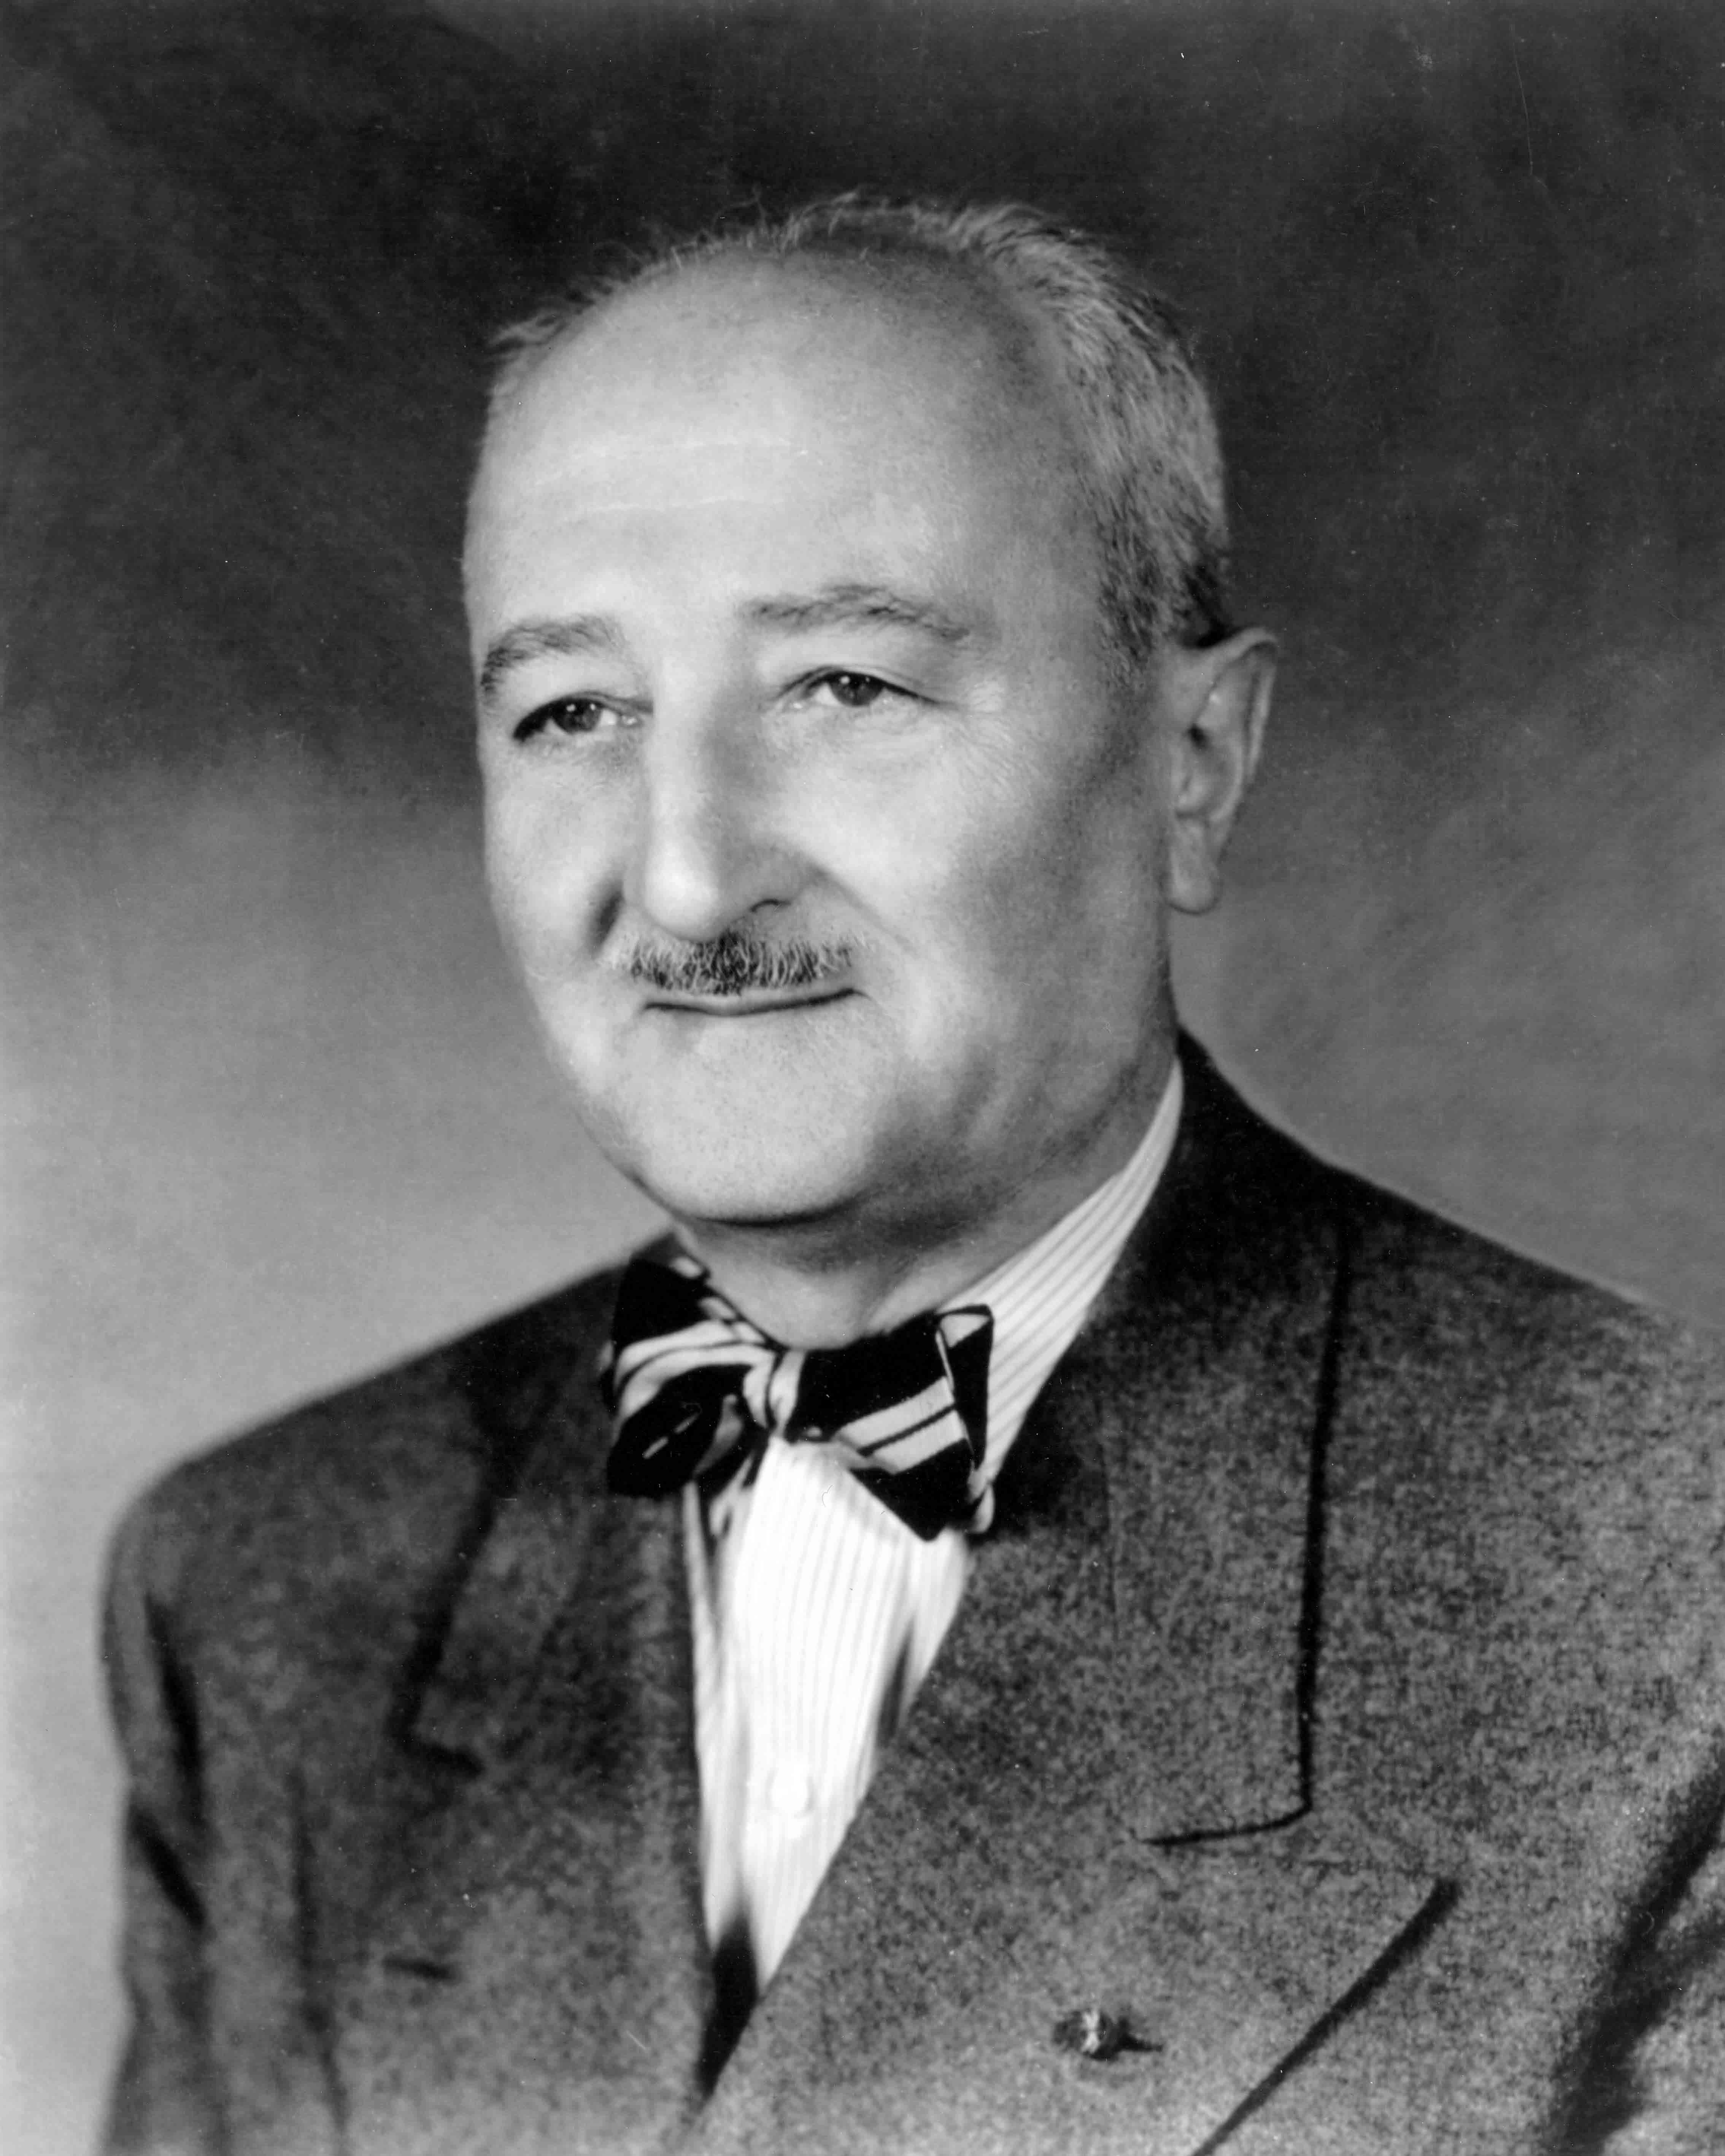 William F. Friedman. Photo by U.S. Government (date unknown). PD-U.S. Government. Wikimedia Commons.